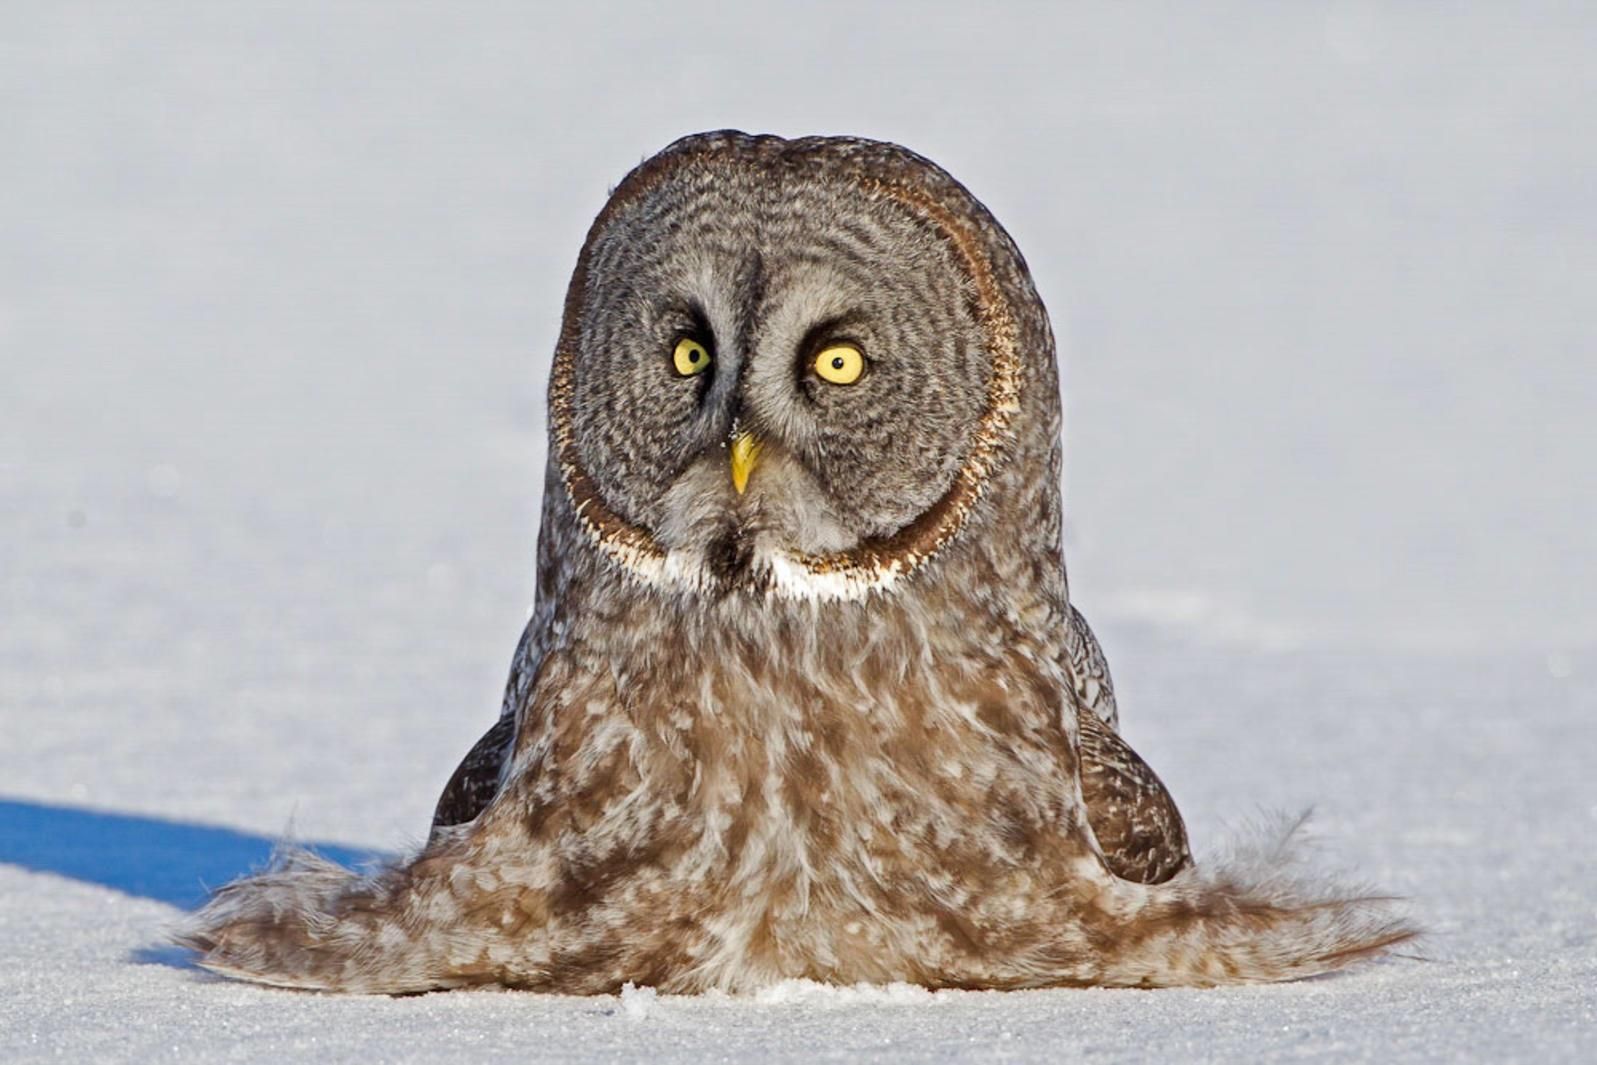 Caution: To Avoid Melting, Do Not Place Owl in Direct Sunlight